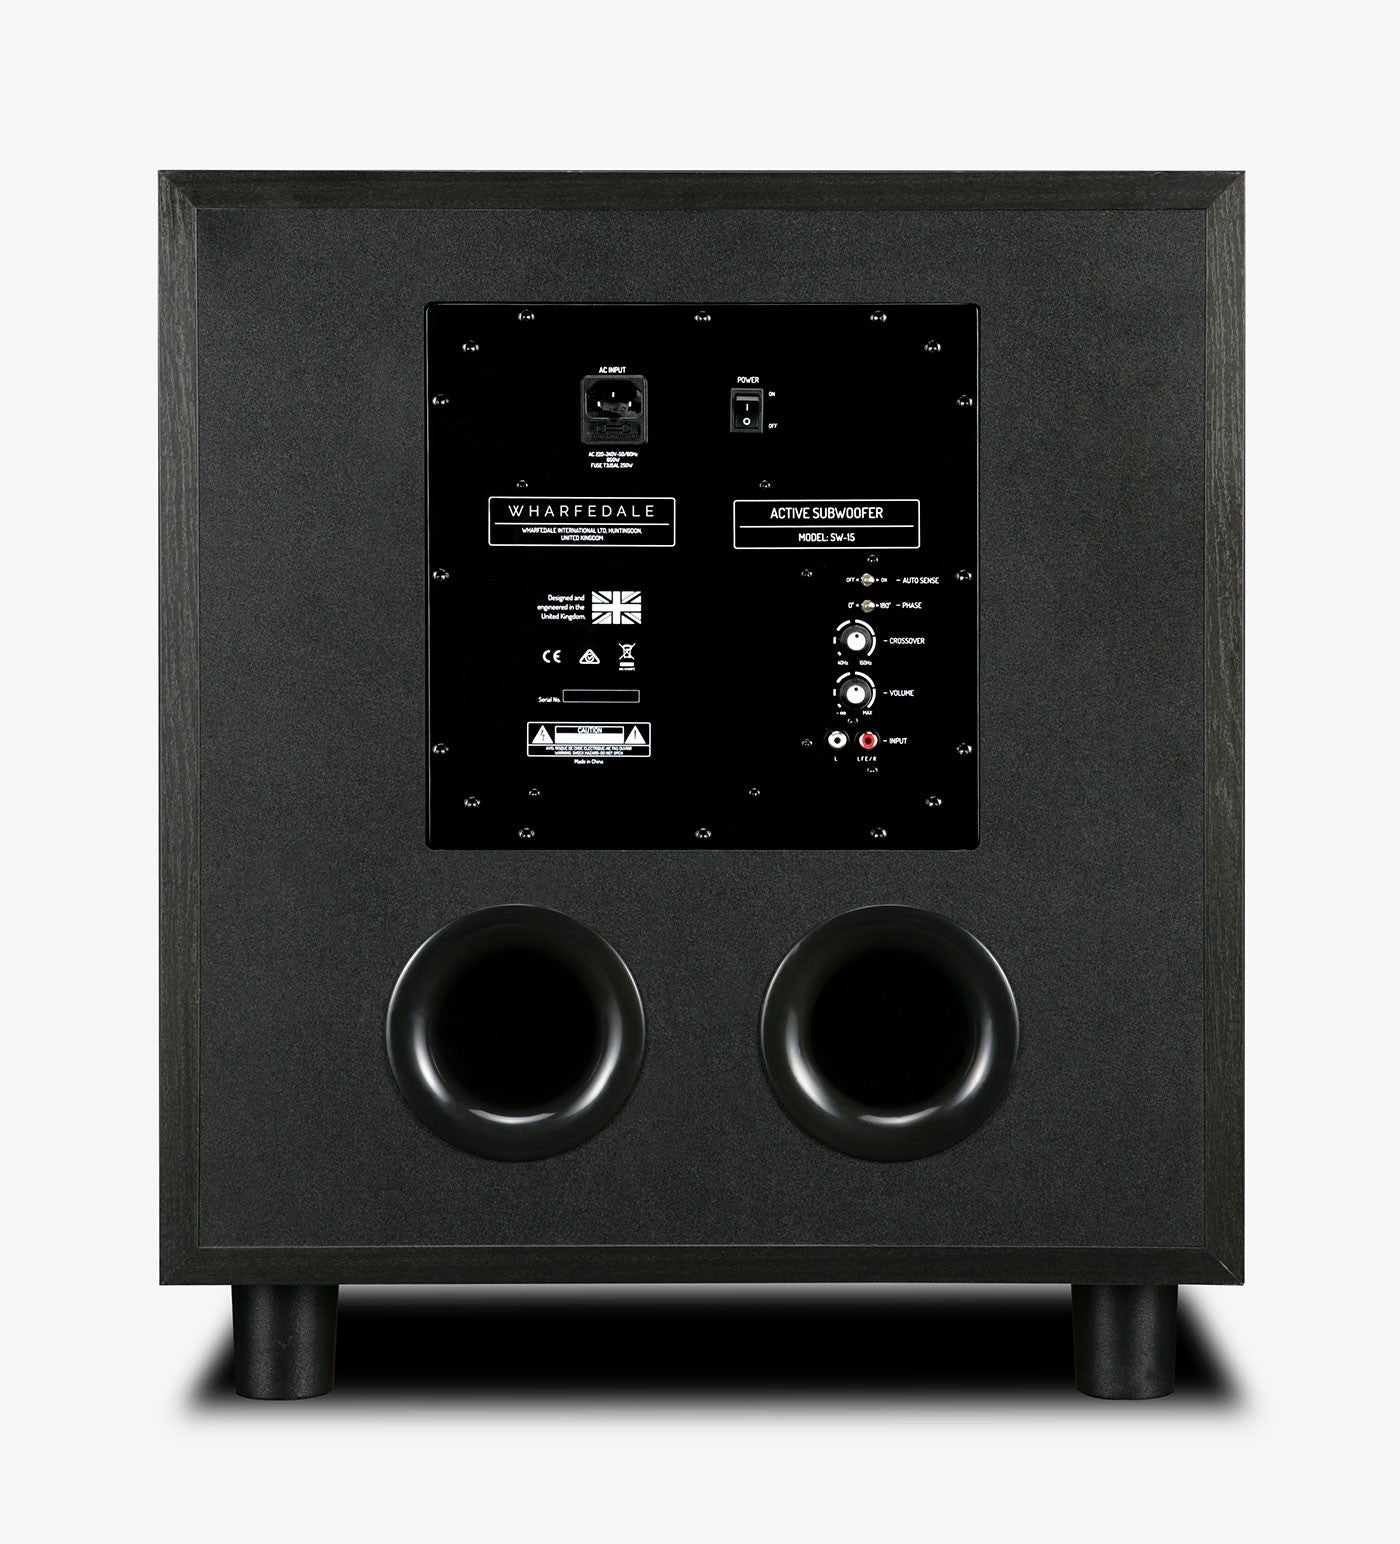 Wharfedale SW-15 subwoofer